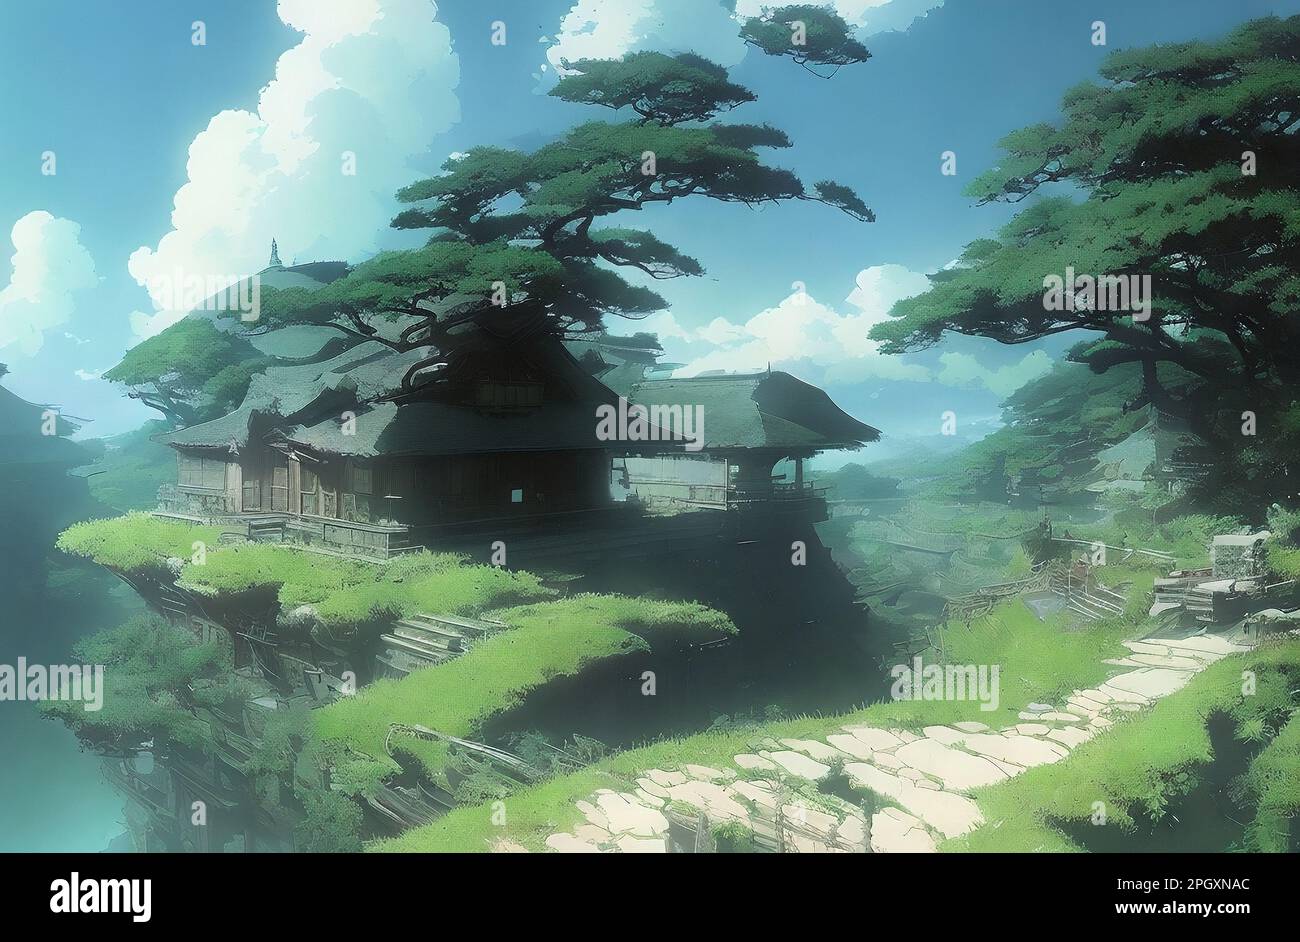 Anime background  Anime scenery, Scenery, Forest art